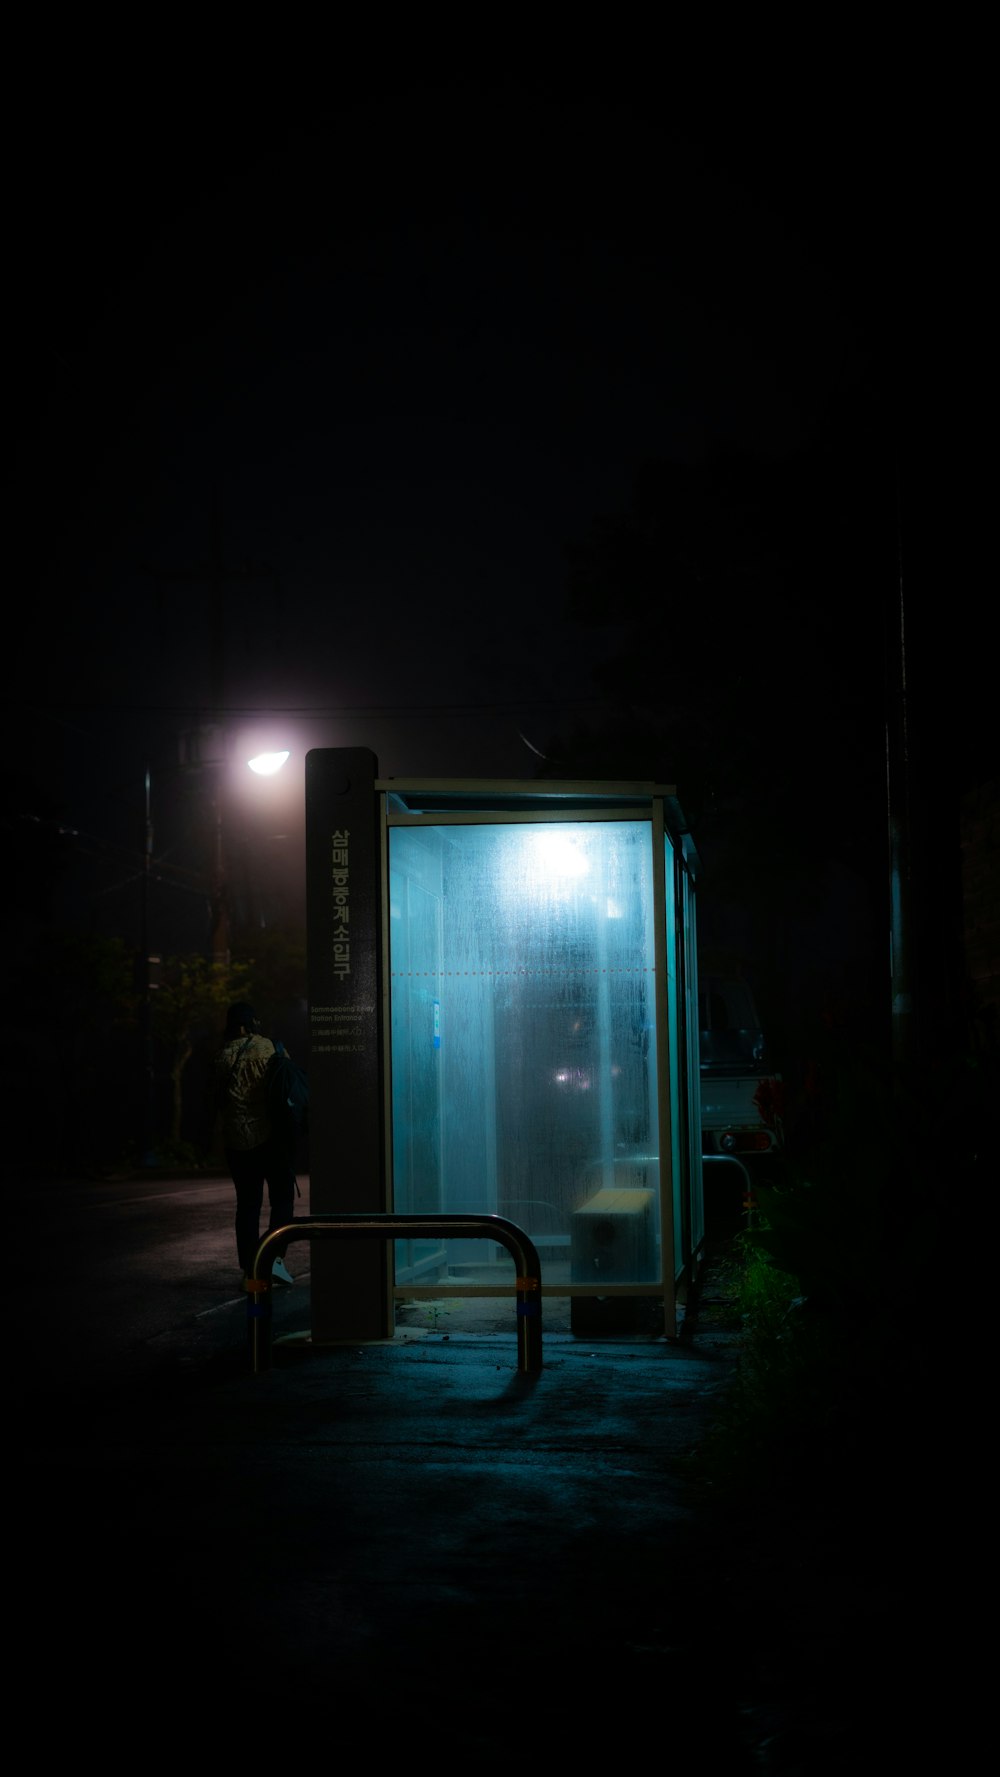 a bus stop at night with a person standing in front of it